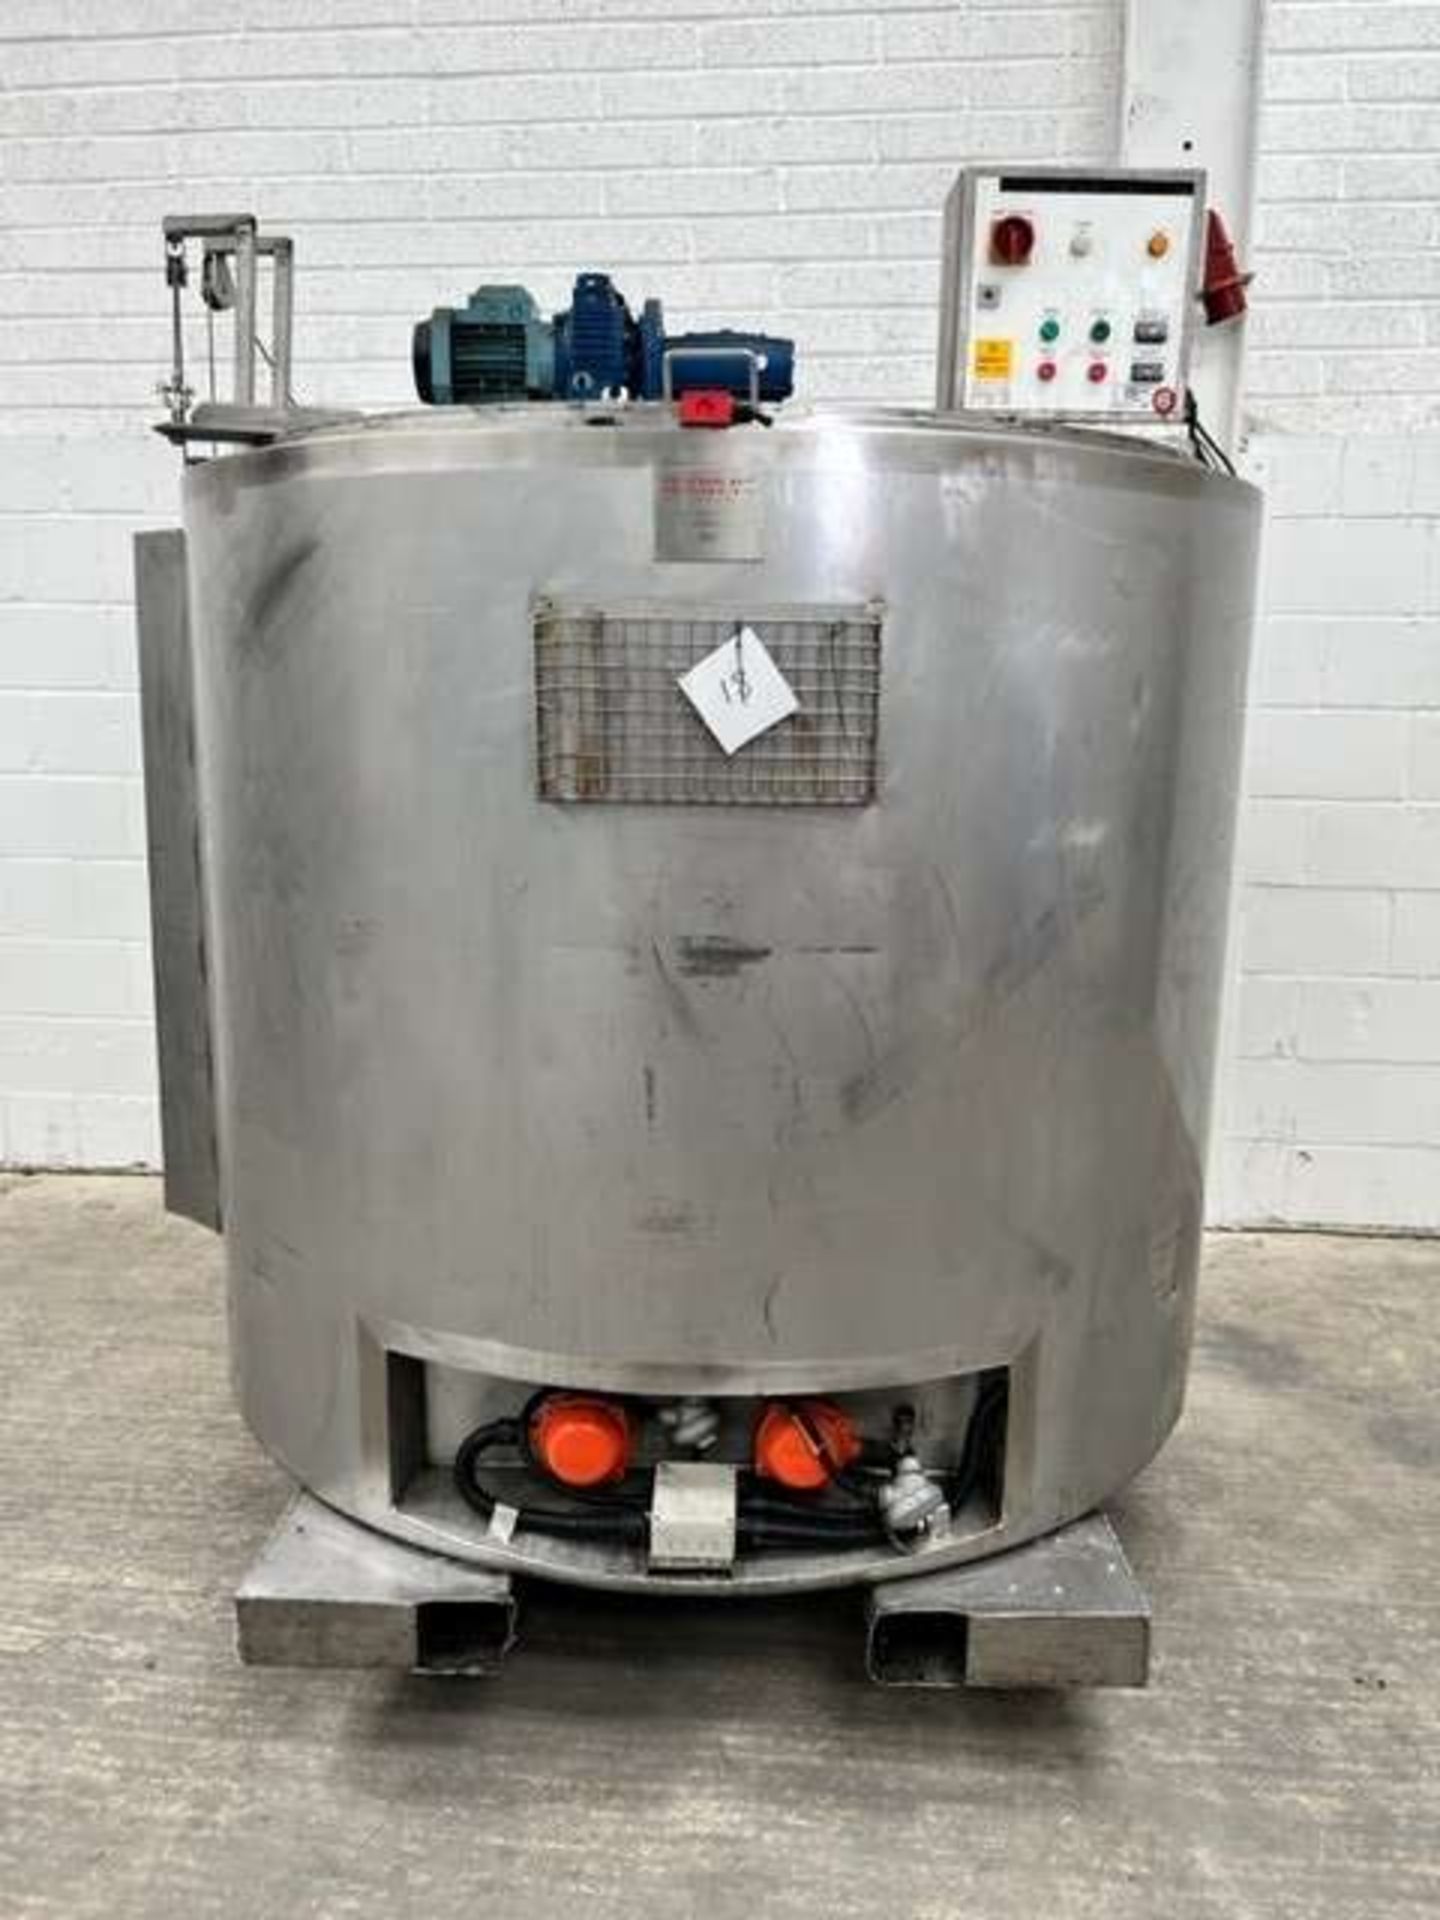 600 Litre Top Entry Electrically Heated Jacketed Vessel - Image 4 of 8